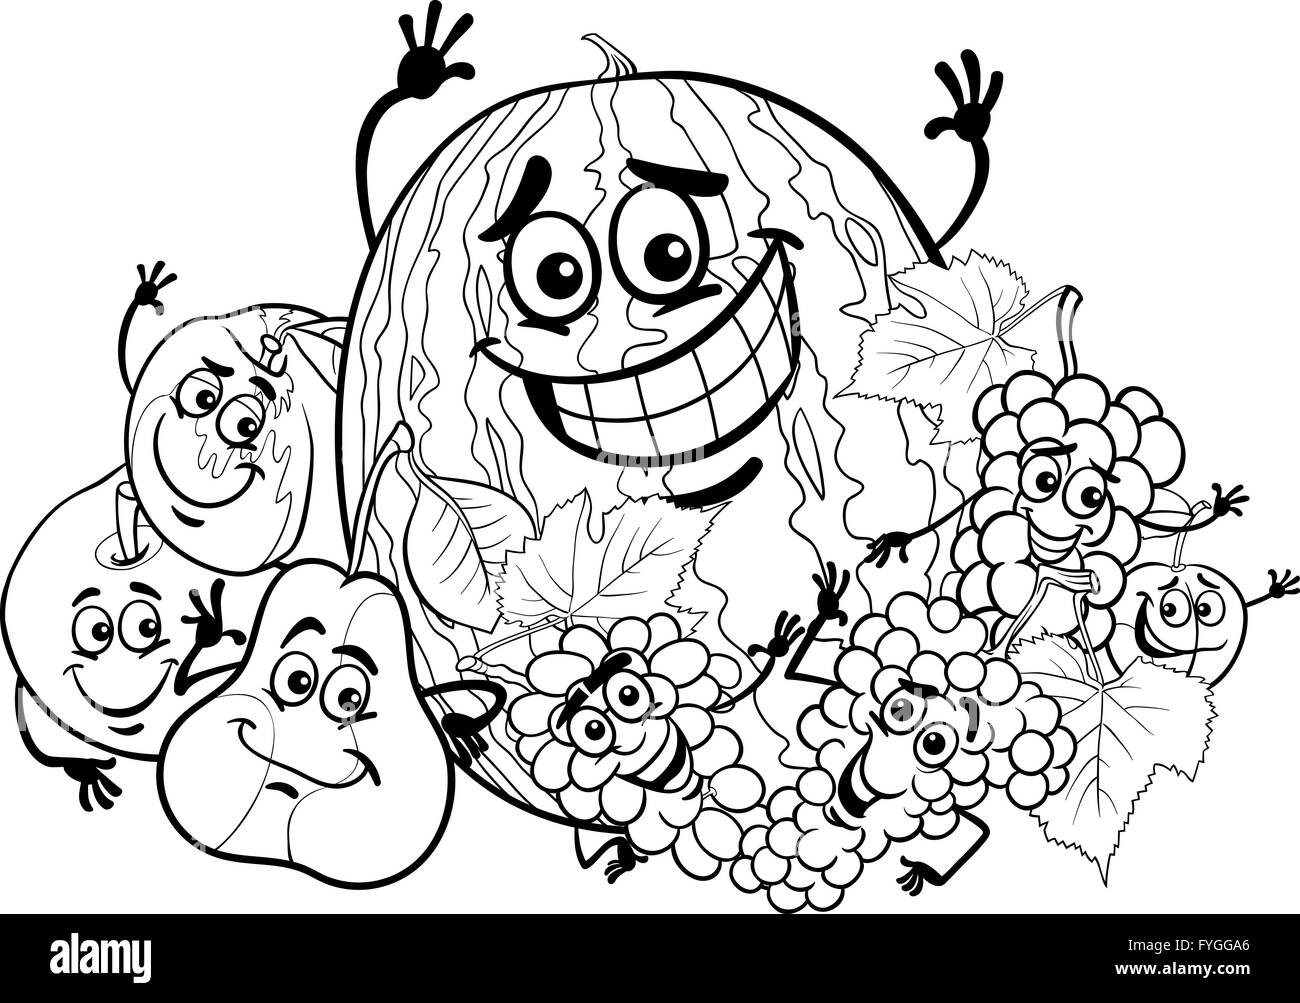 fruits group cartoon for coloring book Stock Photo